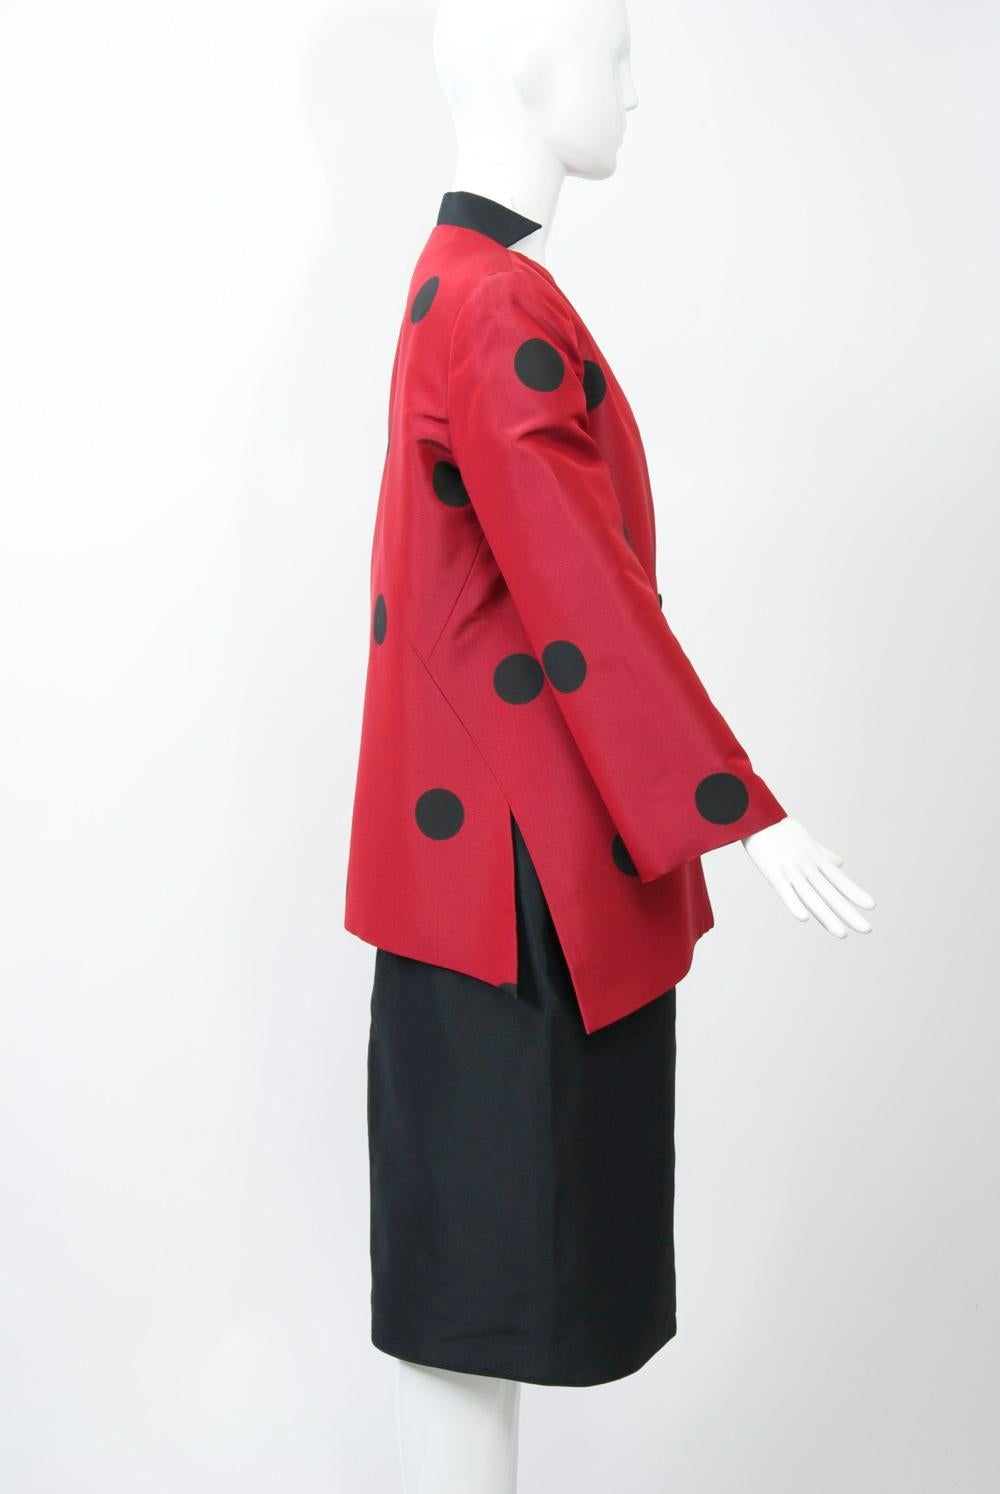 Geoffrey Beene Red and Black Silk Suit In Good Condition For Sale In Alford, MA